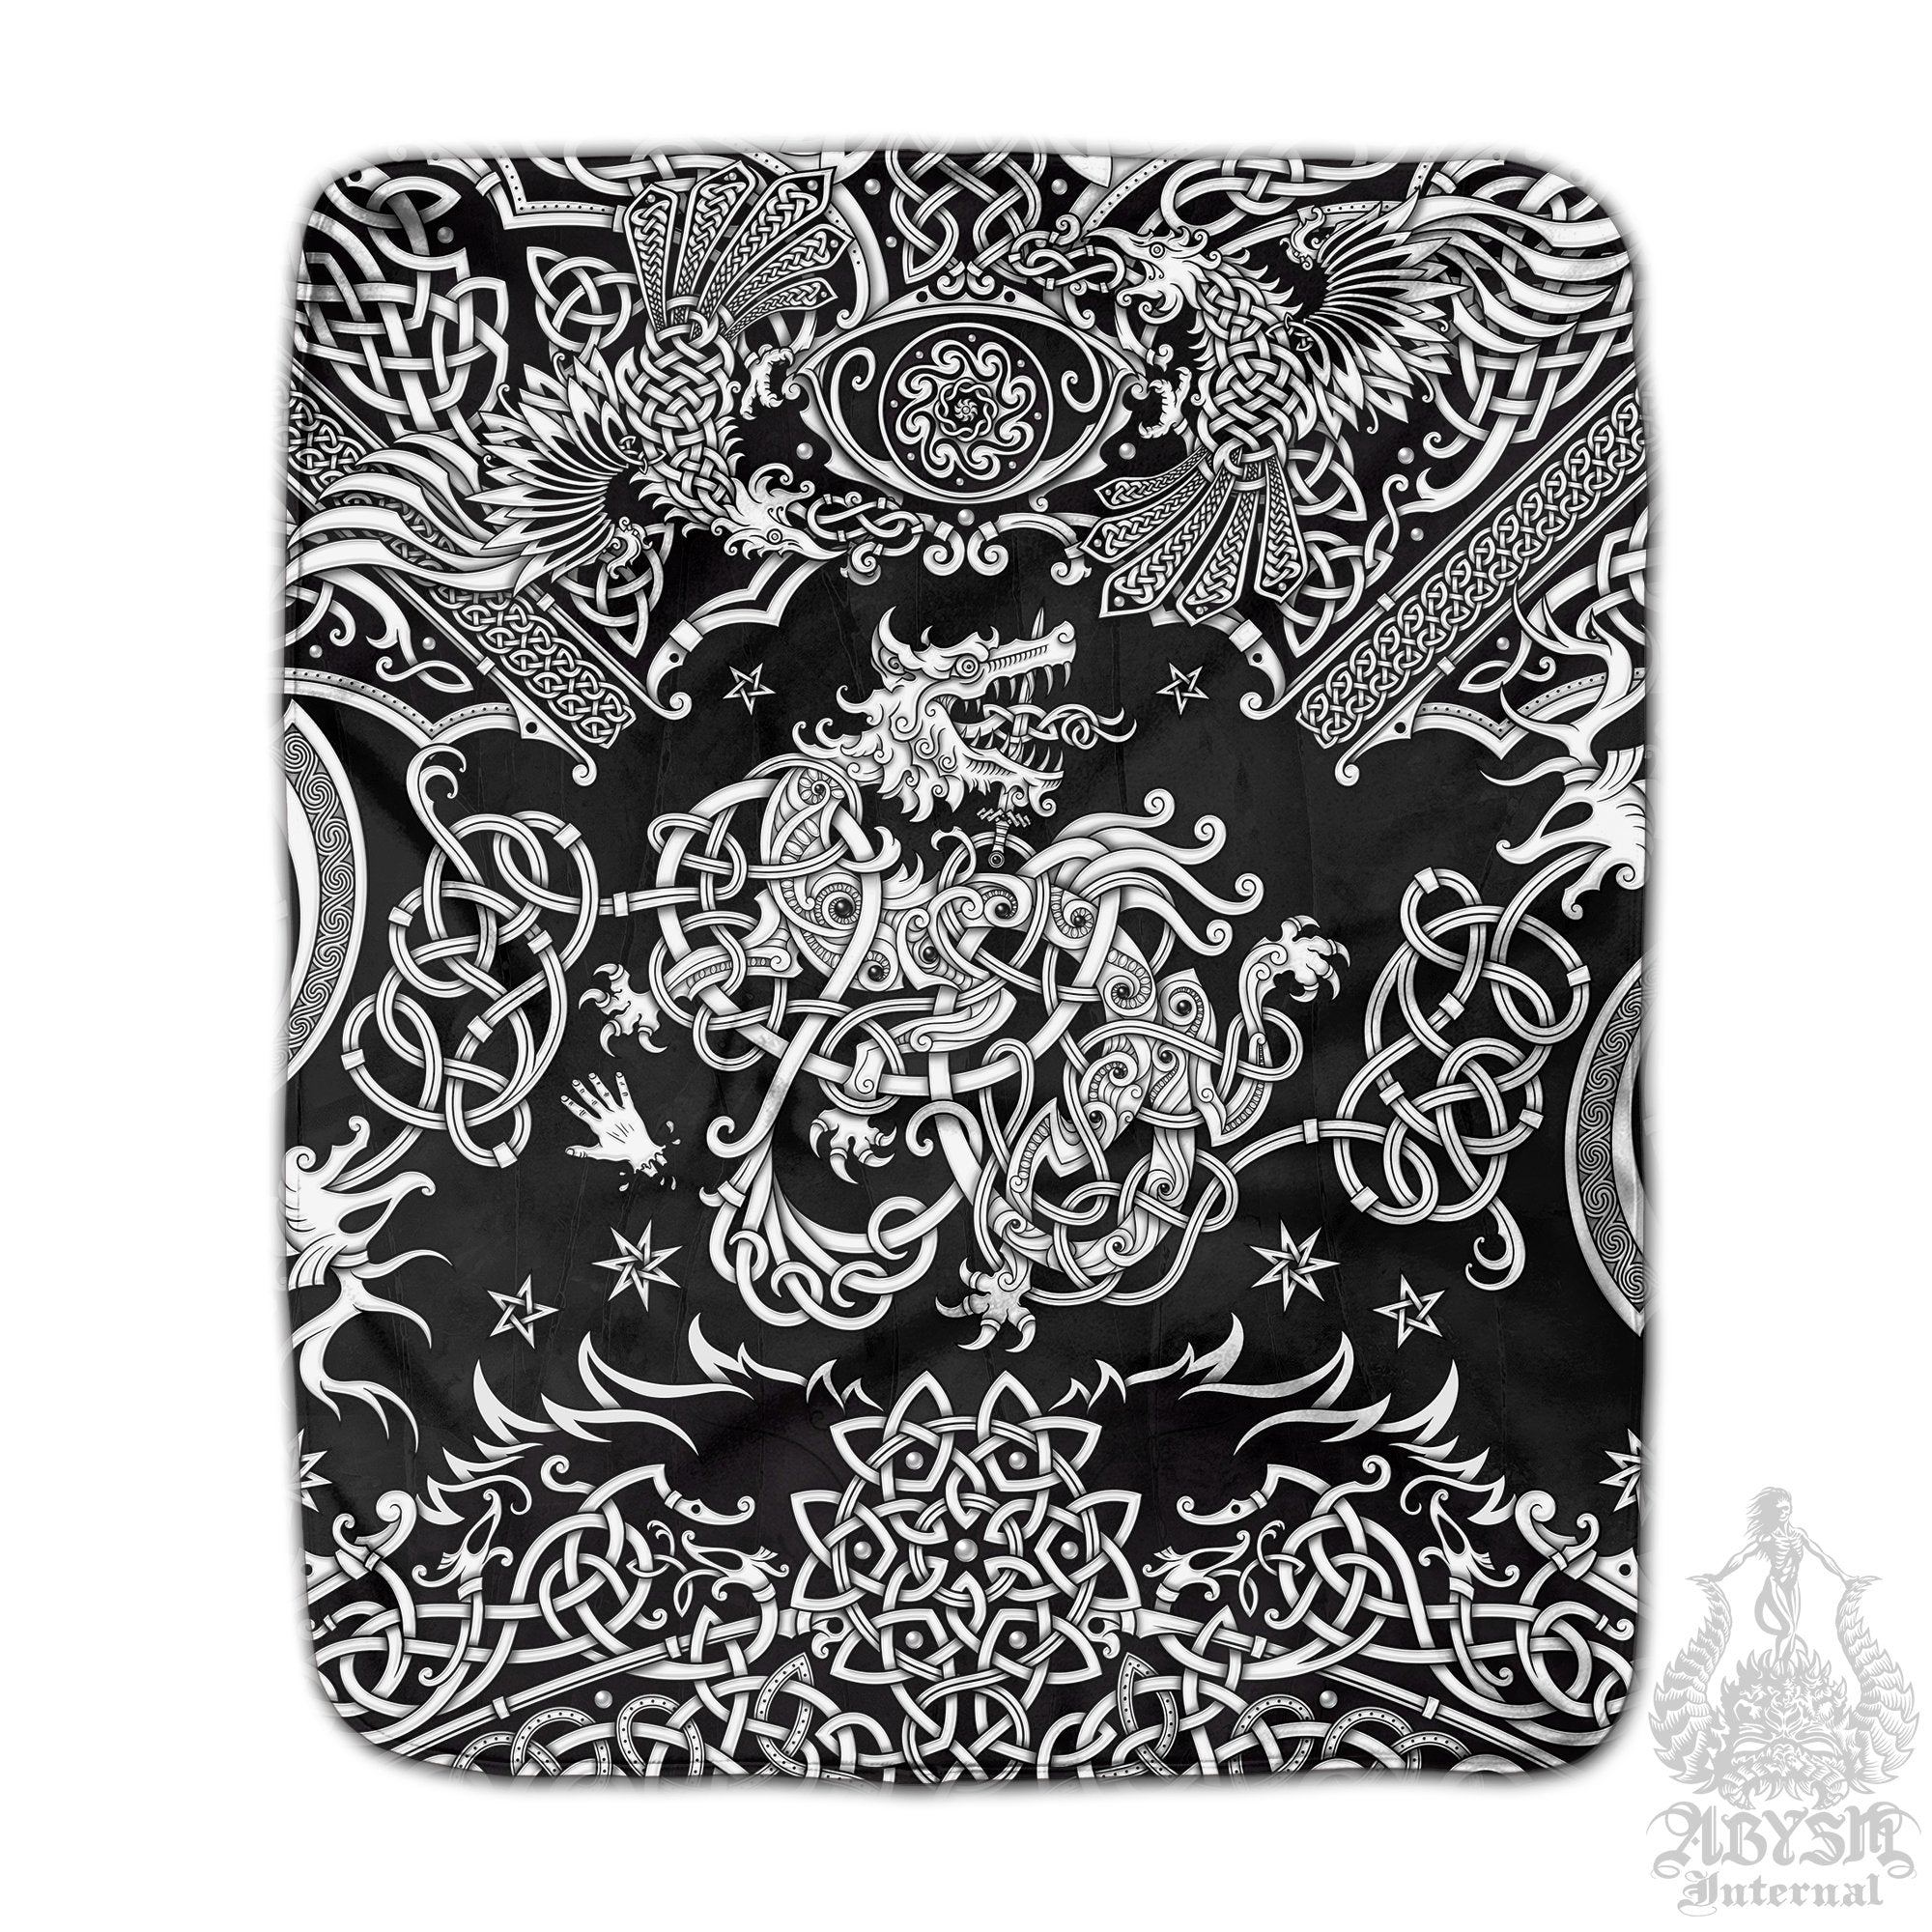 Intricate black and white throw Sherpa fleece blanket with the mythological wolf Fenrir made in Viking style art. - Abysm Internal